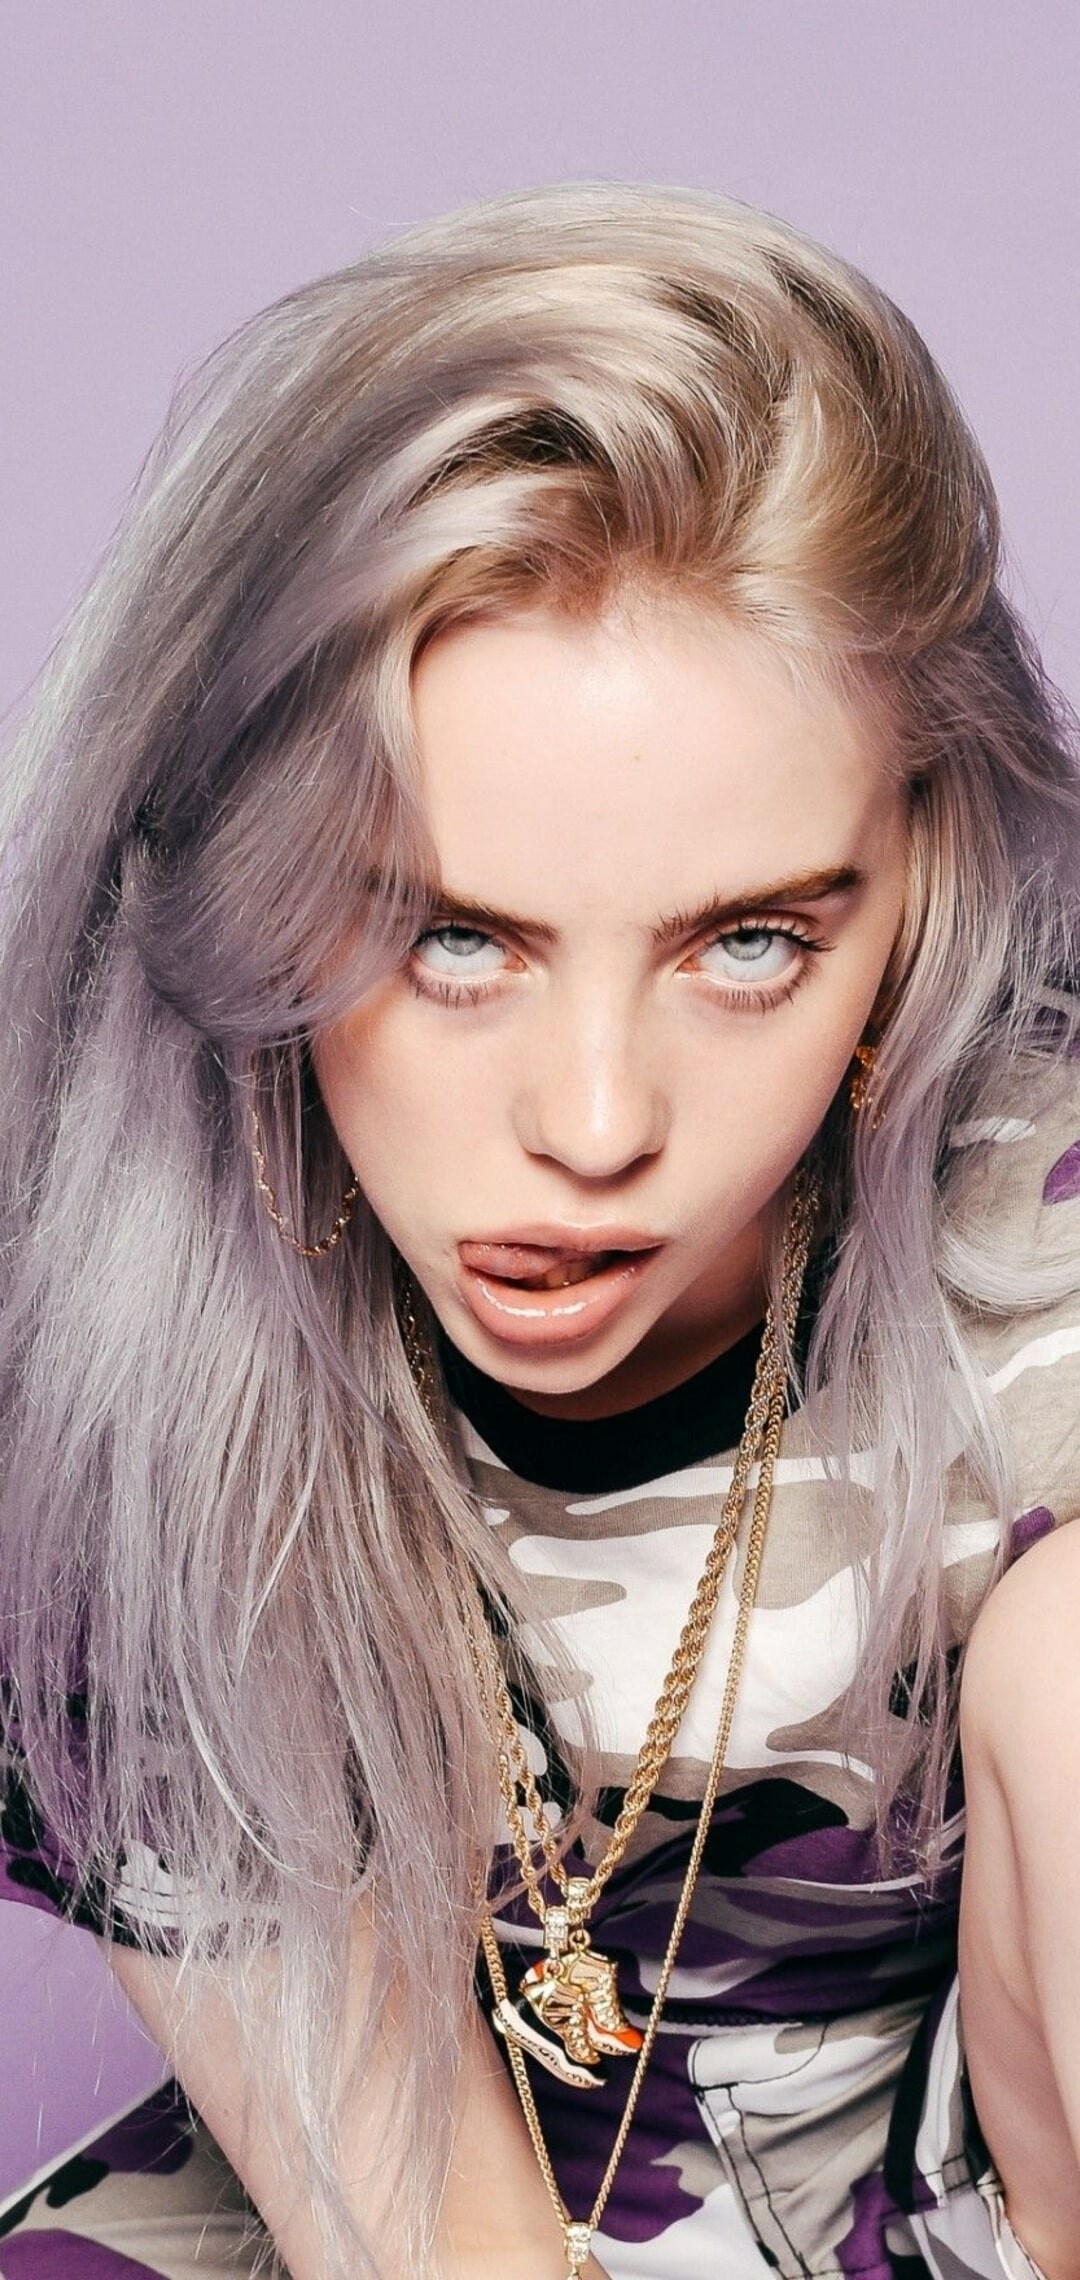 Billie Eilish: One of the most inspirational and impressive singer-songwriters of our time, Don't Smile at Me. 1080x2280 HD Wallpaper.